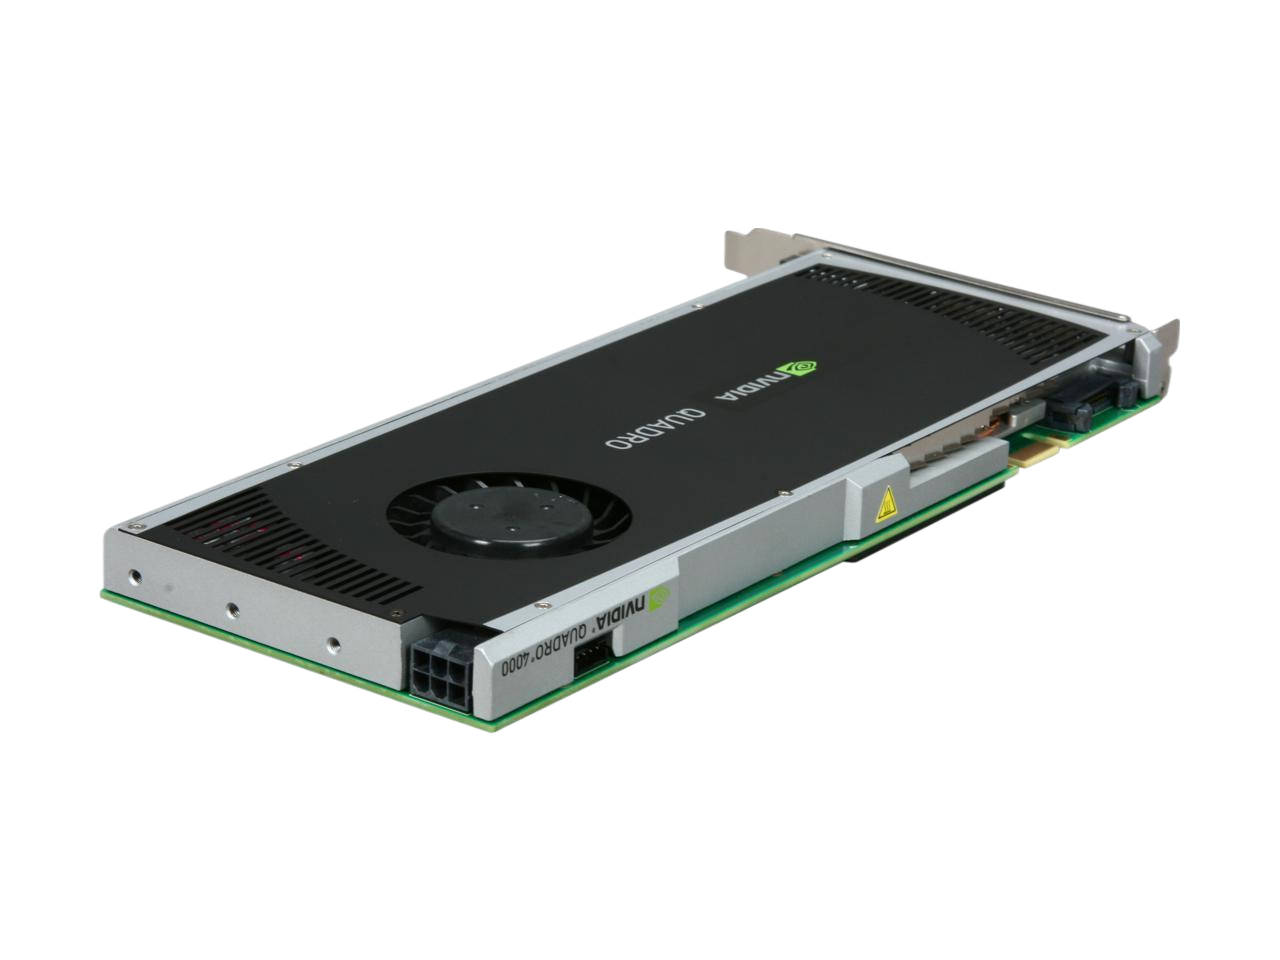 NVIDIA Quadro 4000 2GB GDDR5 PCI-E x16 2.0 Graphics Video Card With DVI and DisplayPort Outputs 38XNM Standard Height Workstation Video Card